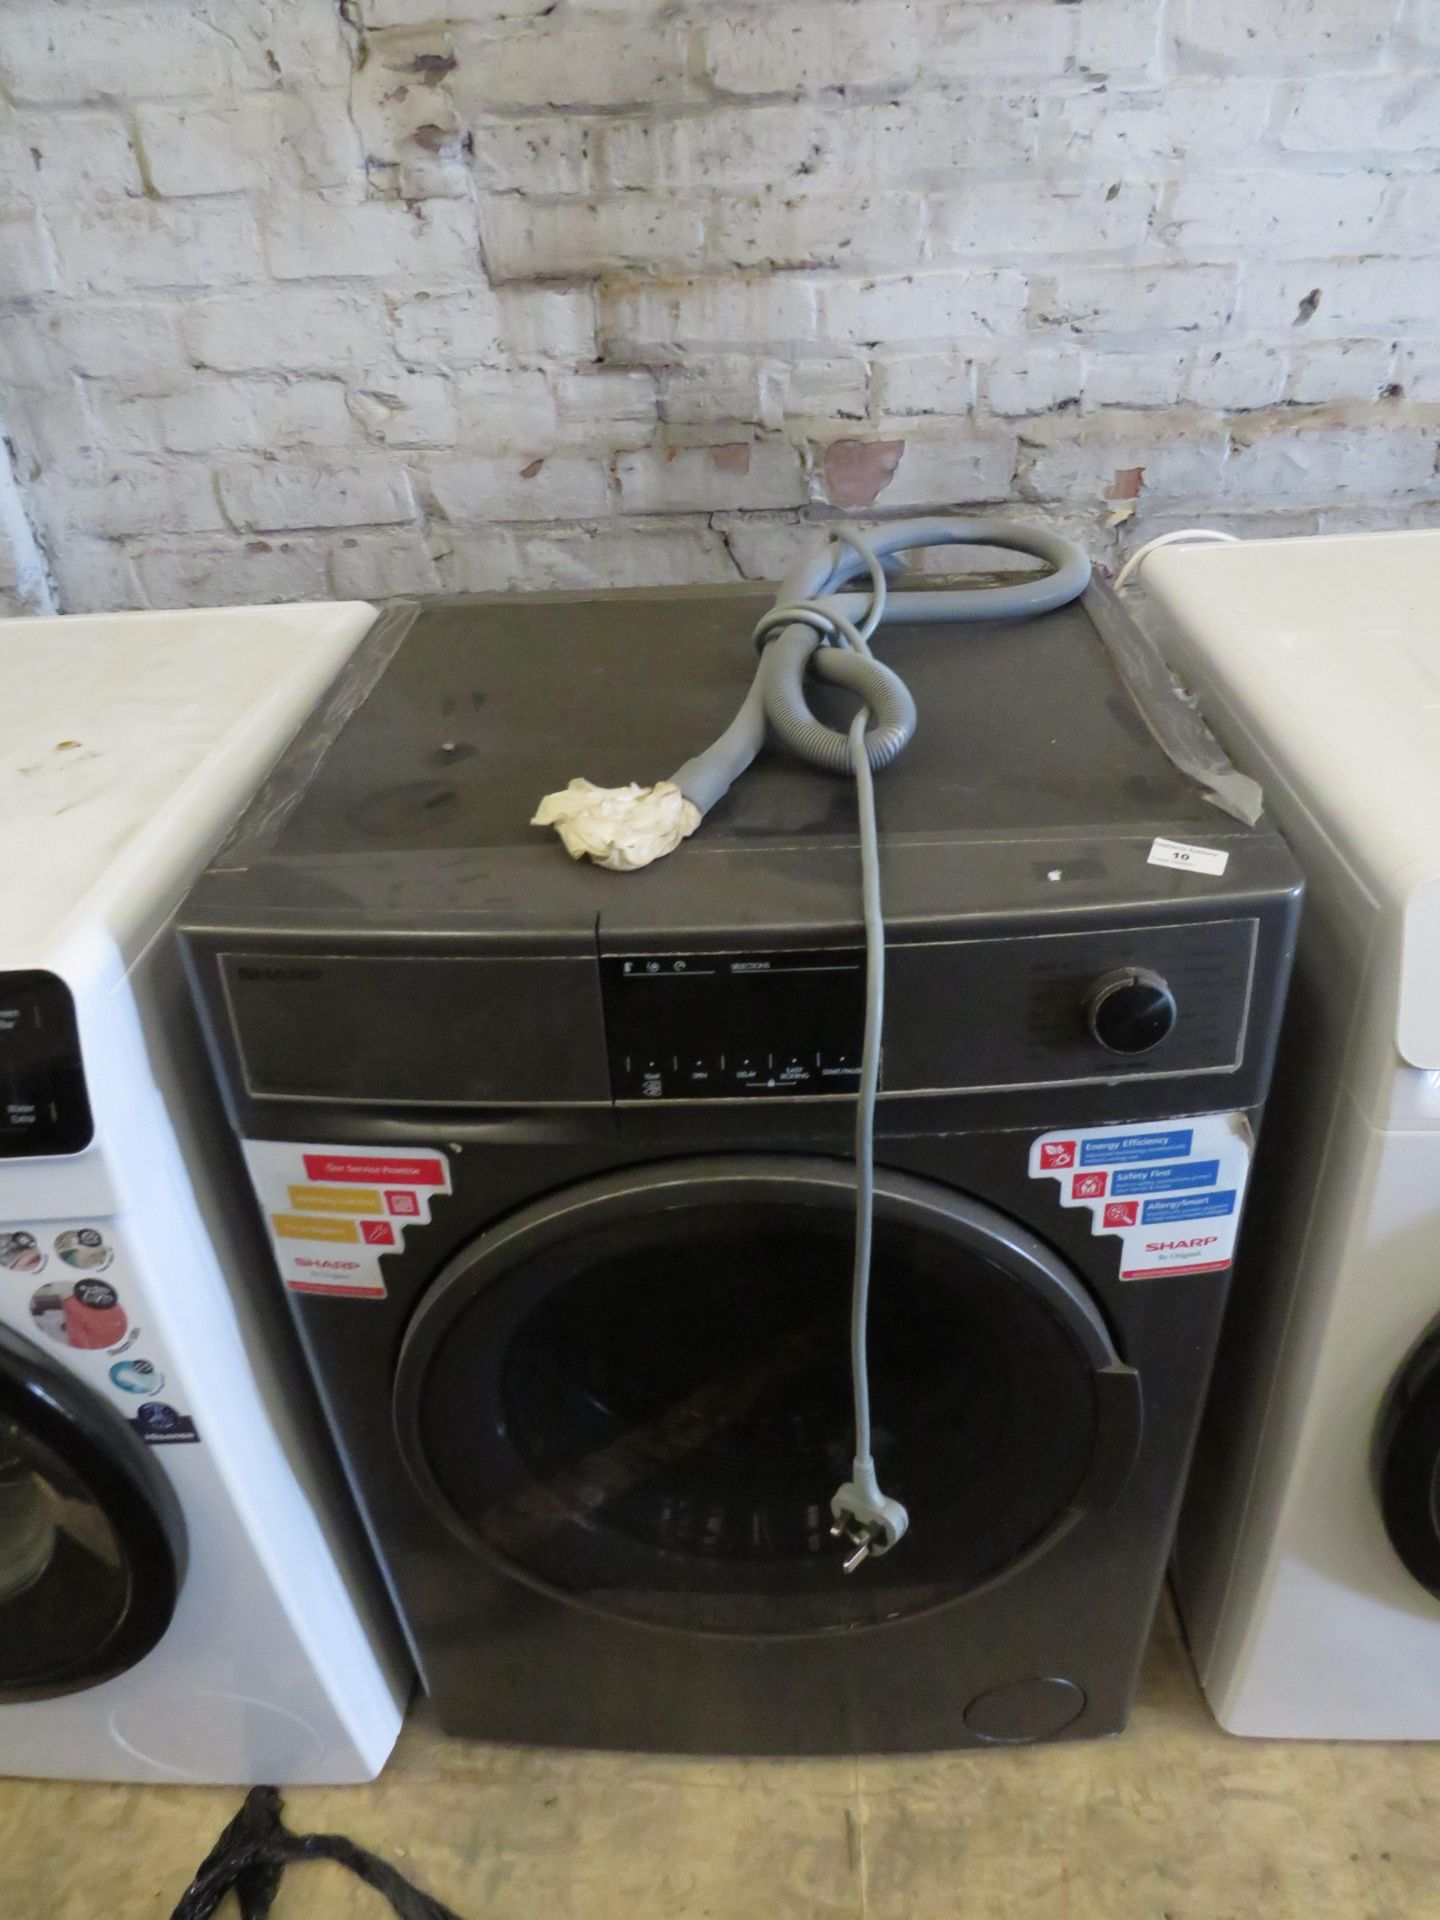 Sharp E5-HFH8147A3 washing machine, unble to check as has damged plug, has been well used